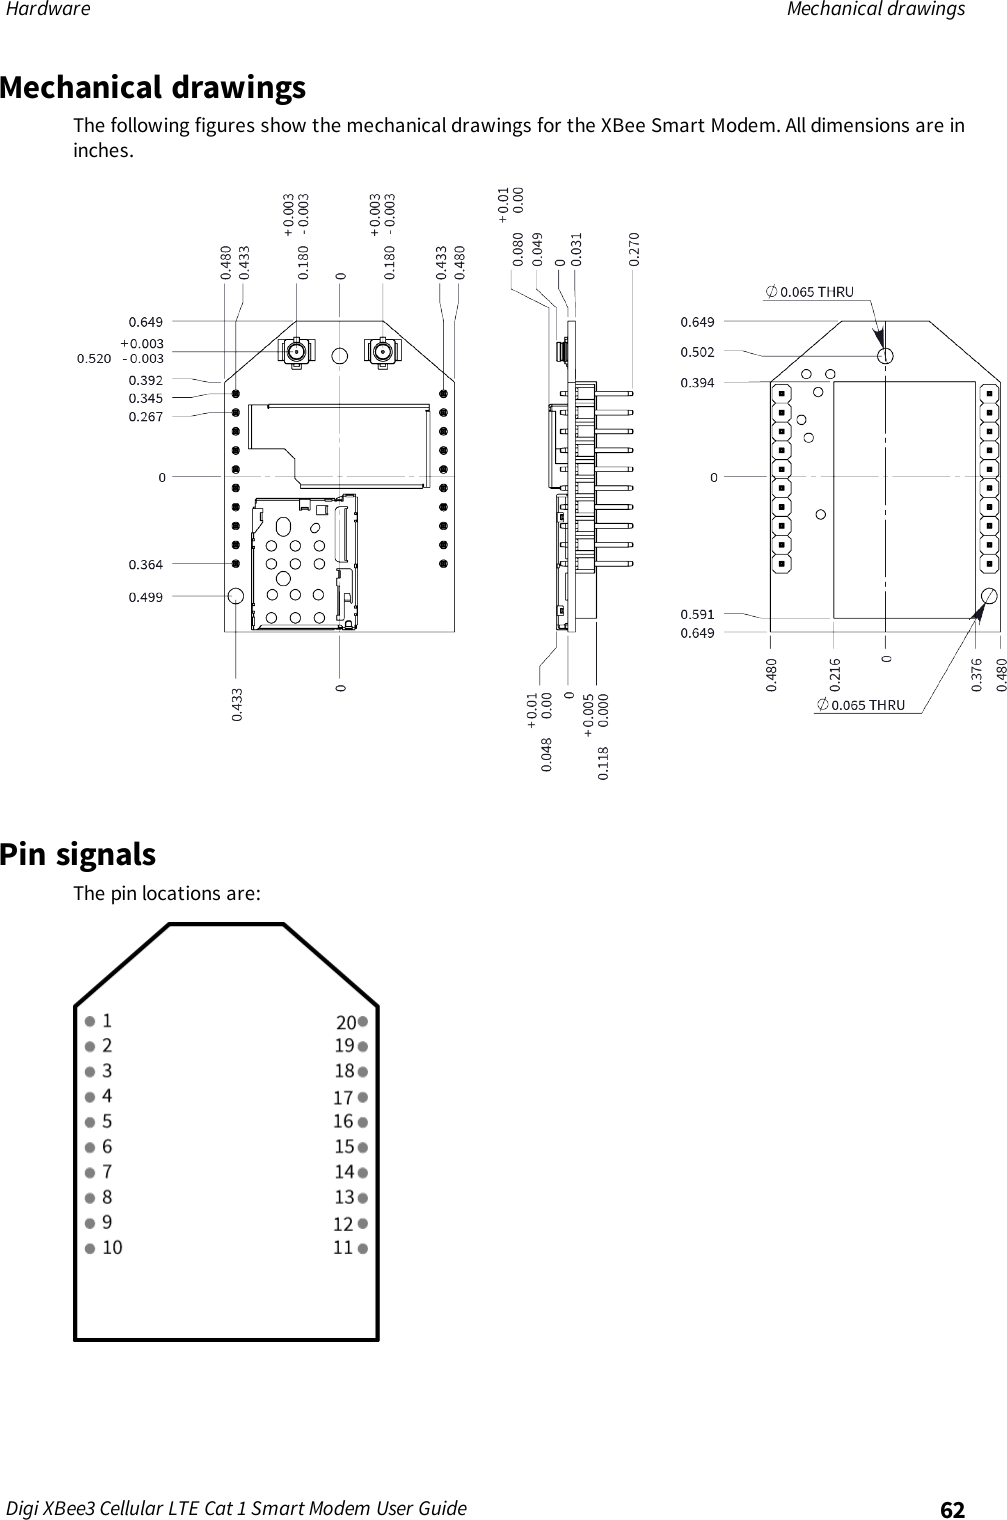 Hardware Mechanical drawingsDigi XBee3 Cellular LTE Cat 1 Smart Modem User Guide 62Mechanical drawingsThe following figures show the mechanical drawings for the XBee Smart Modem. All dimensions are ininches.Pin signalsThe pin locations are: